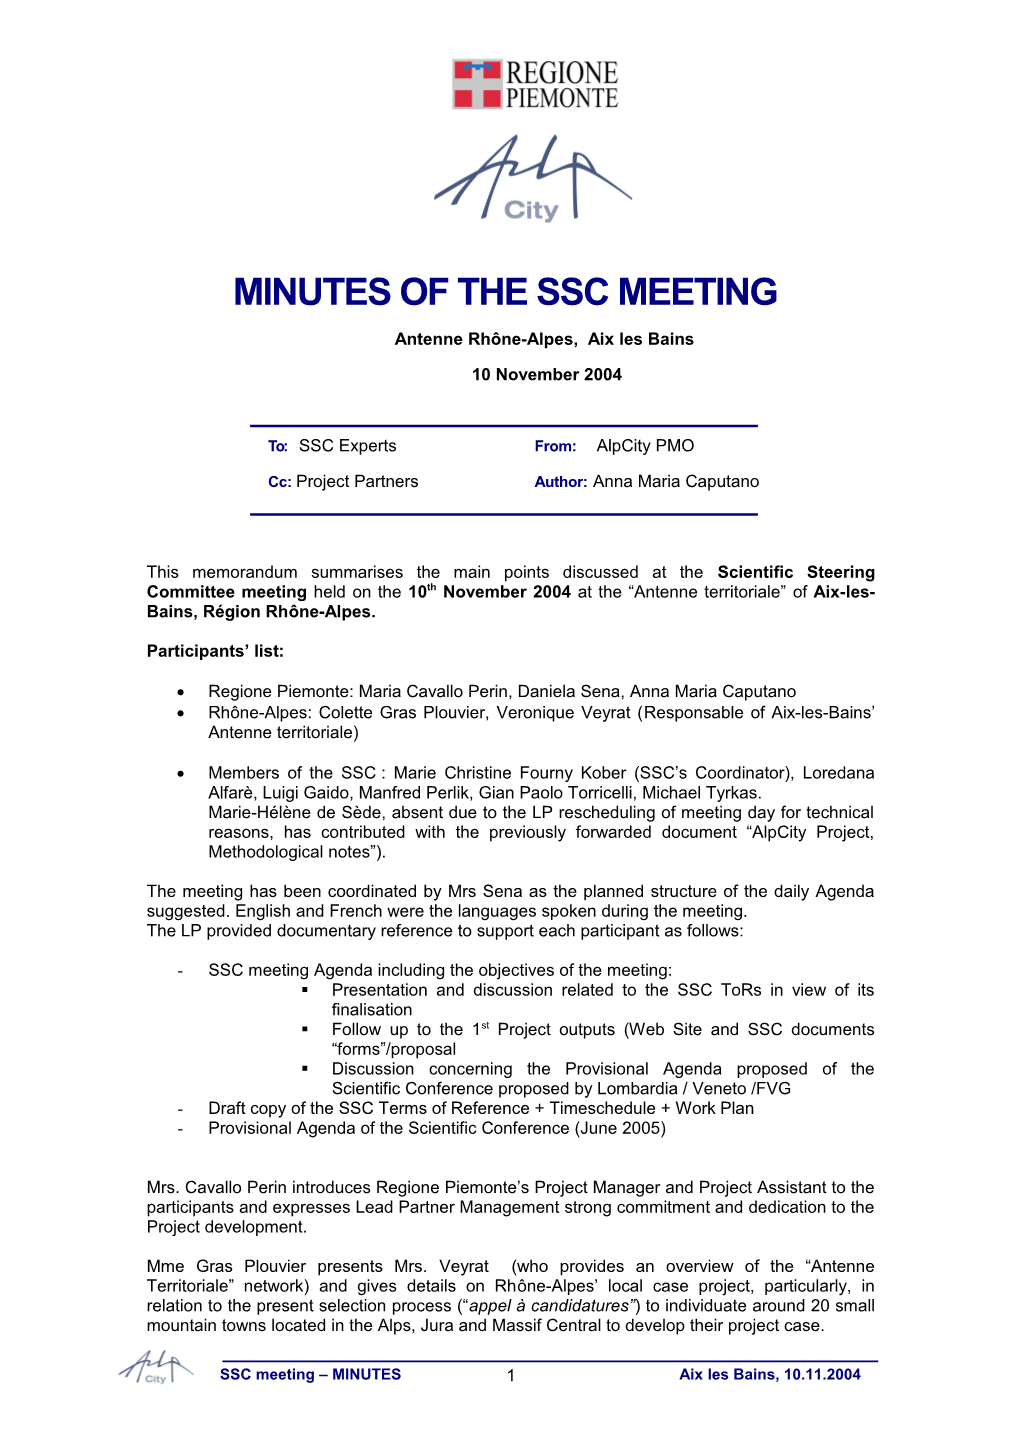 This Memo Summarises the Main Points Discussed at the Meeting Held on the November at The